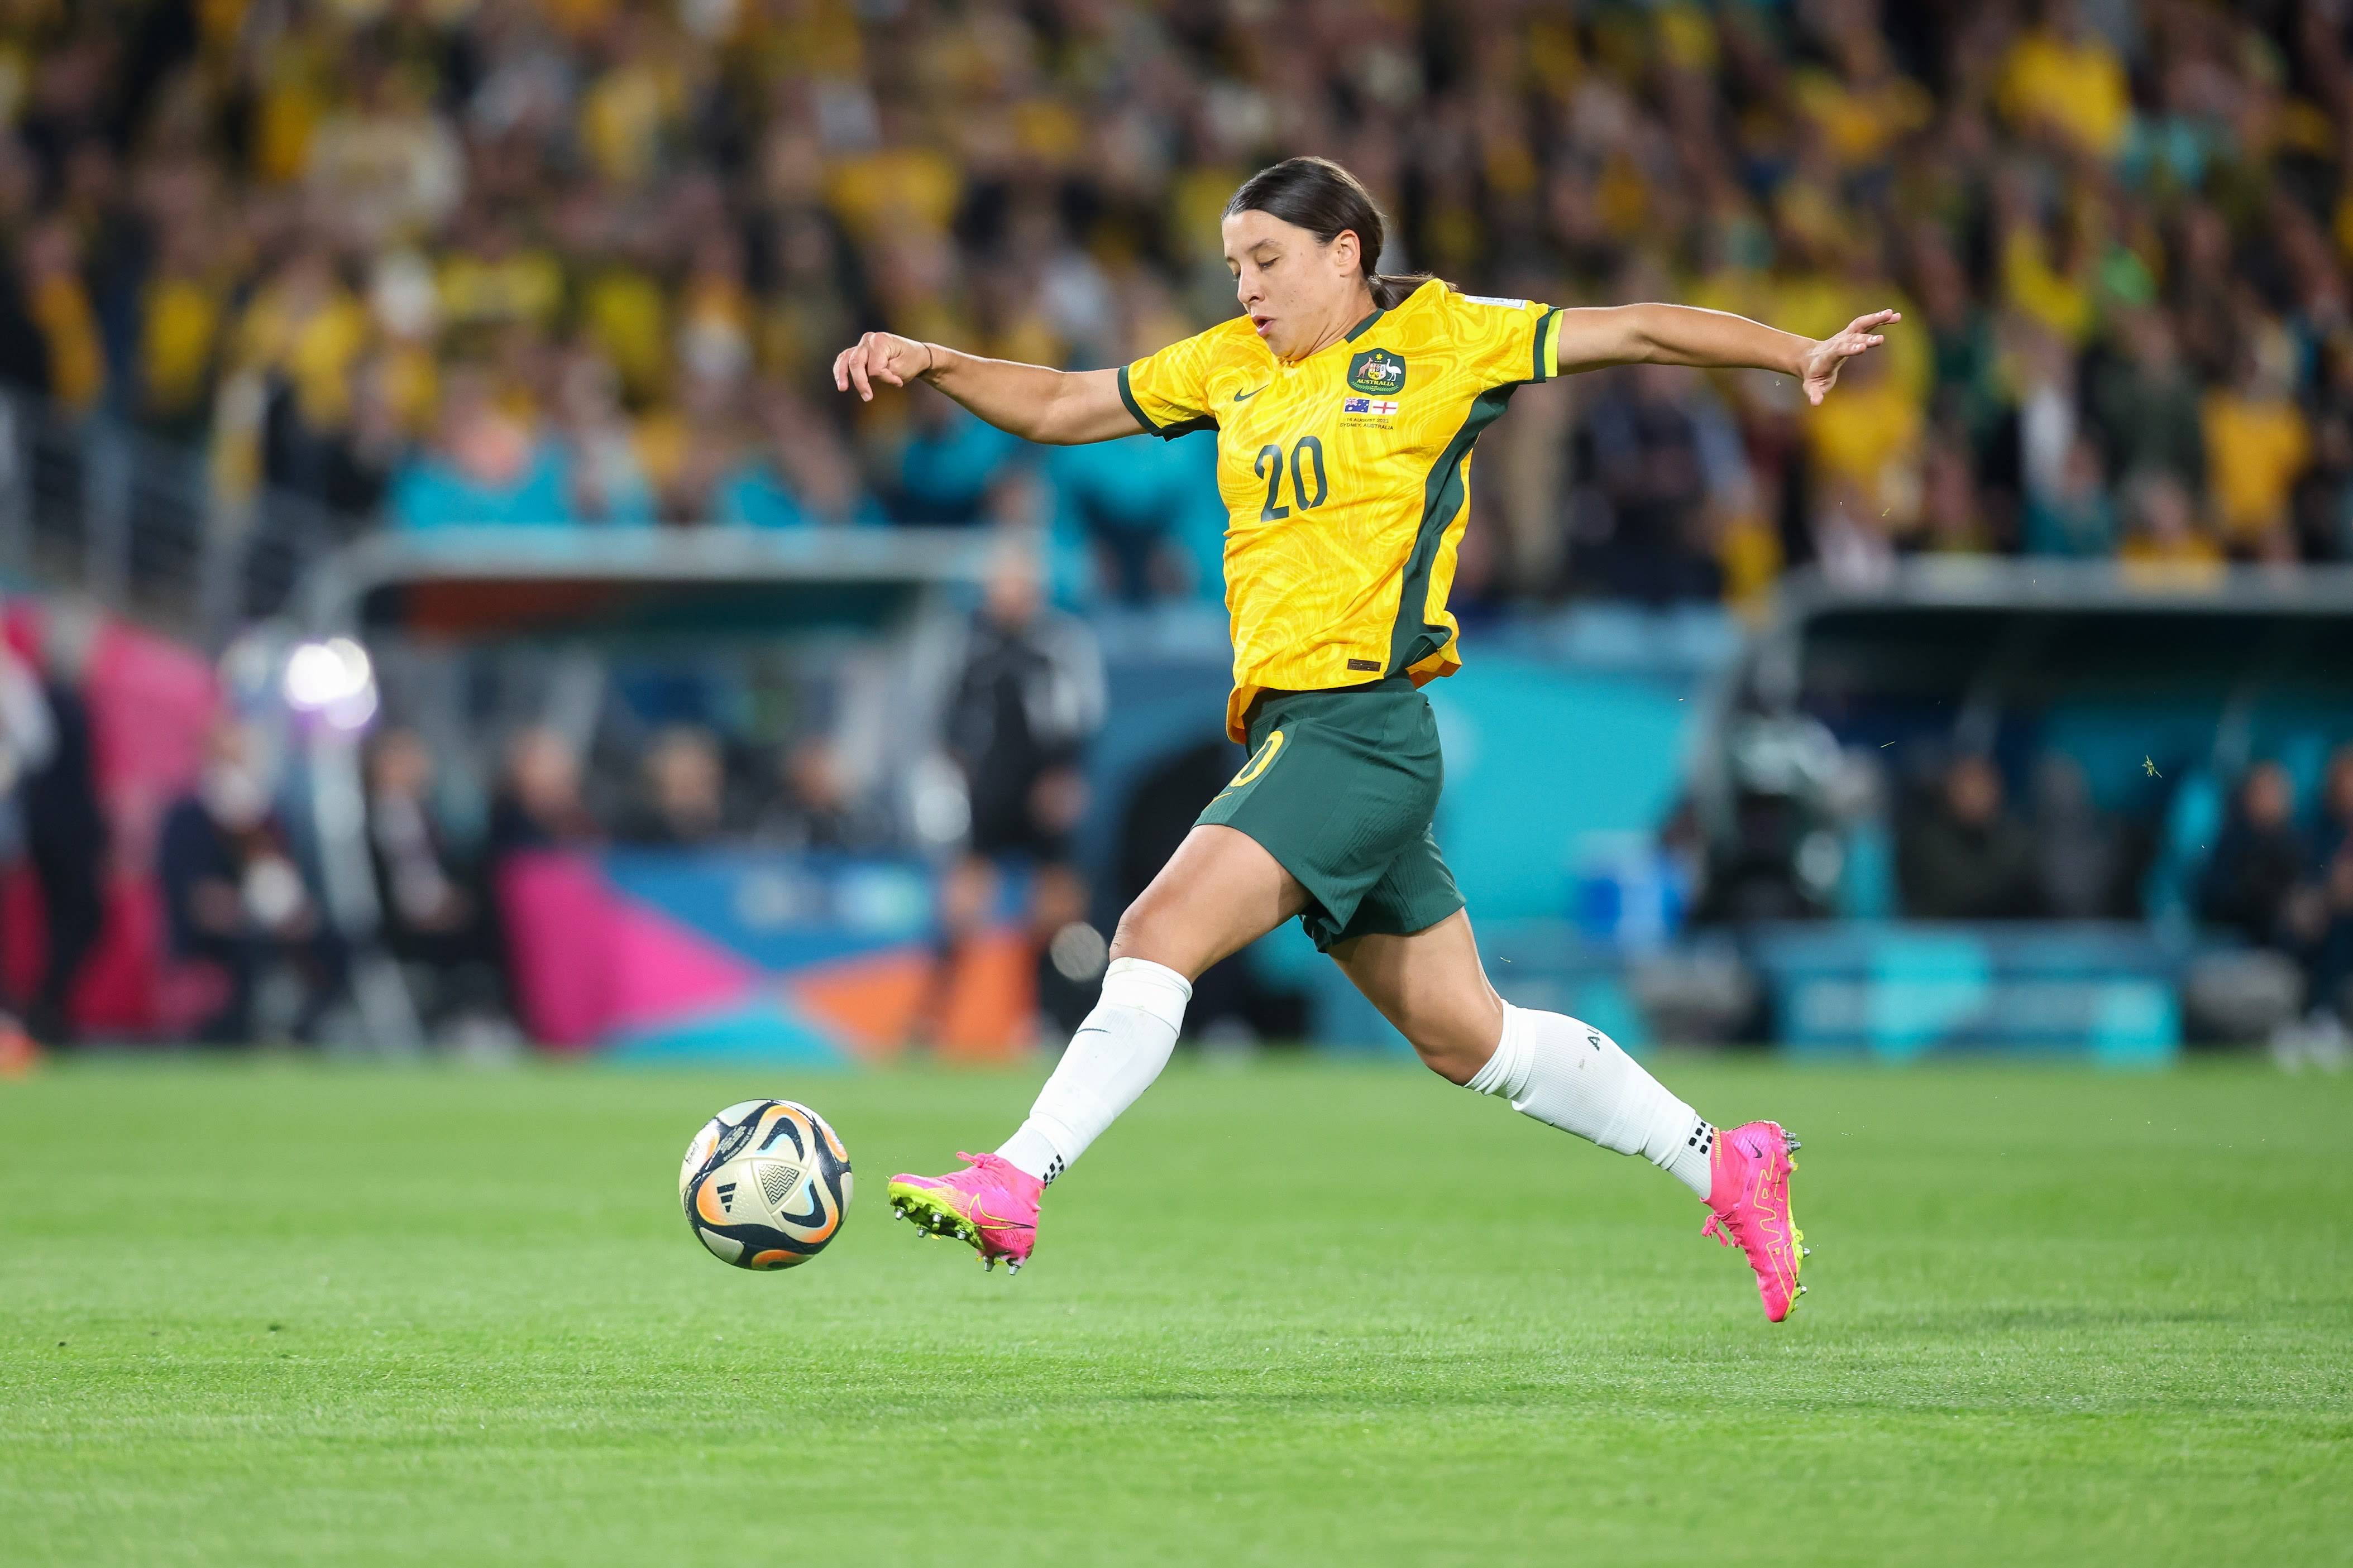 Matildas VS. England Game Was "Australia's Most-watched TV Show"